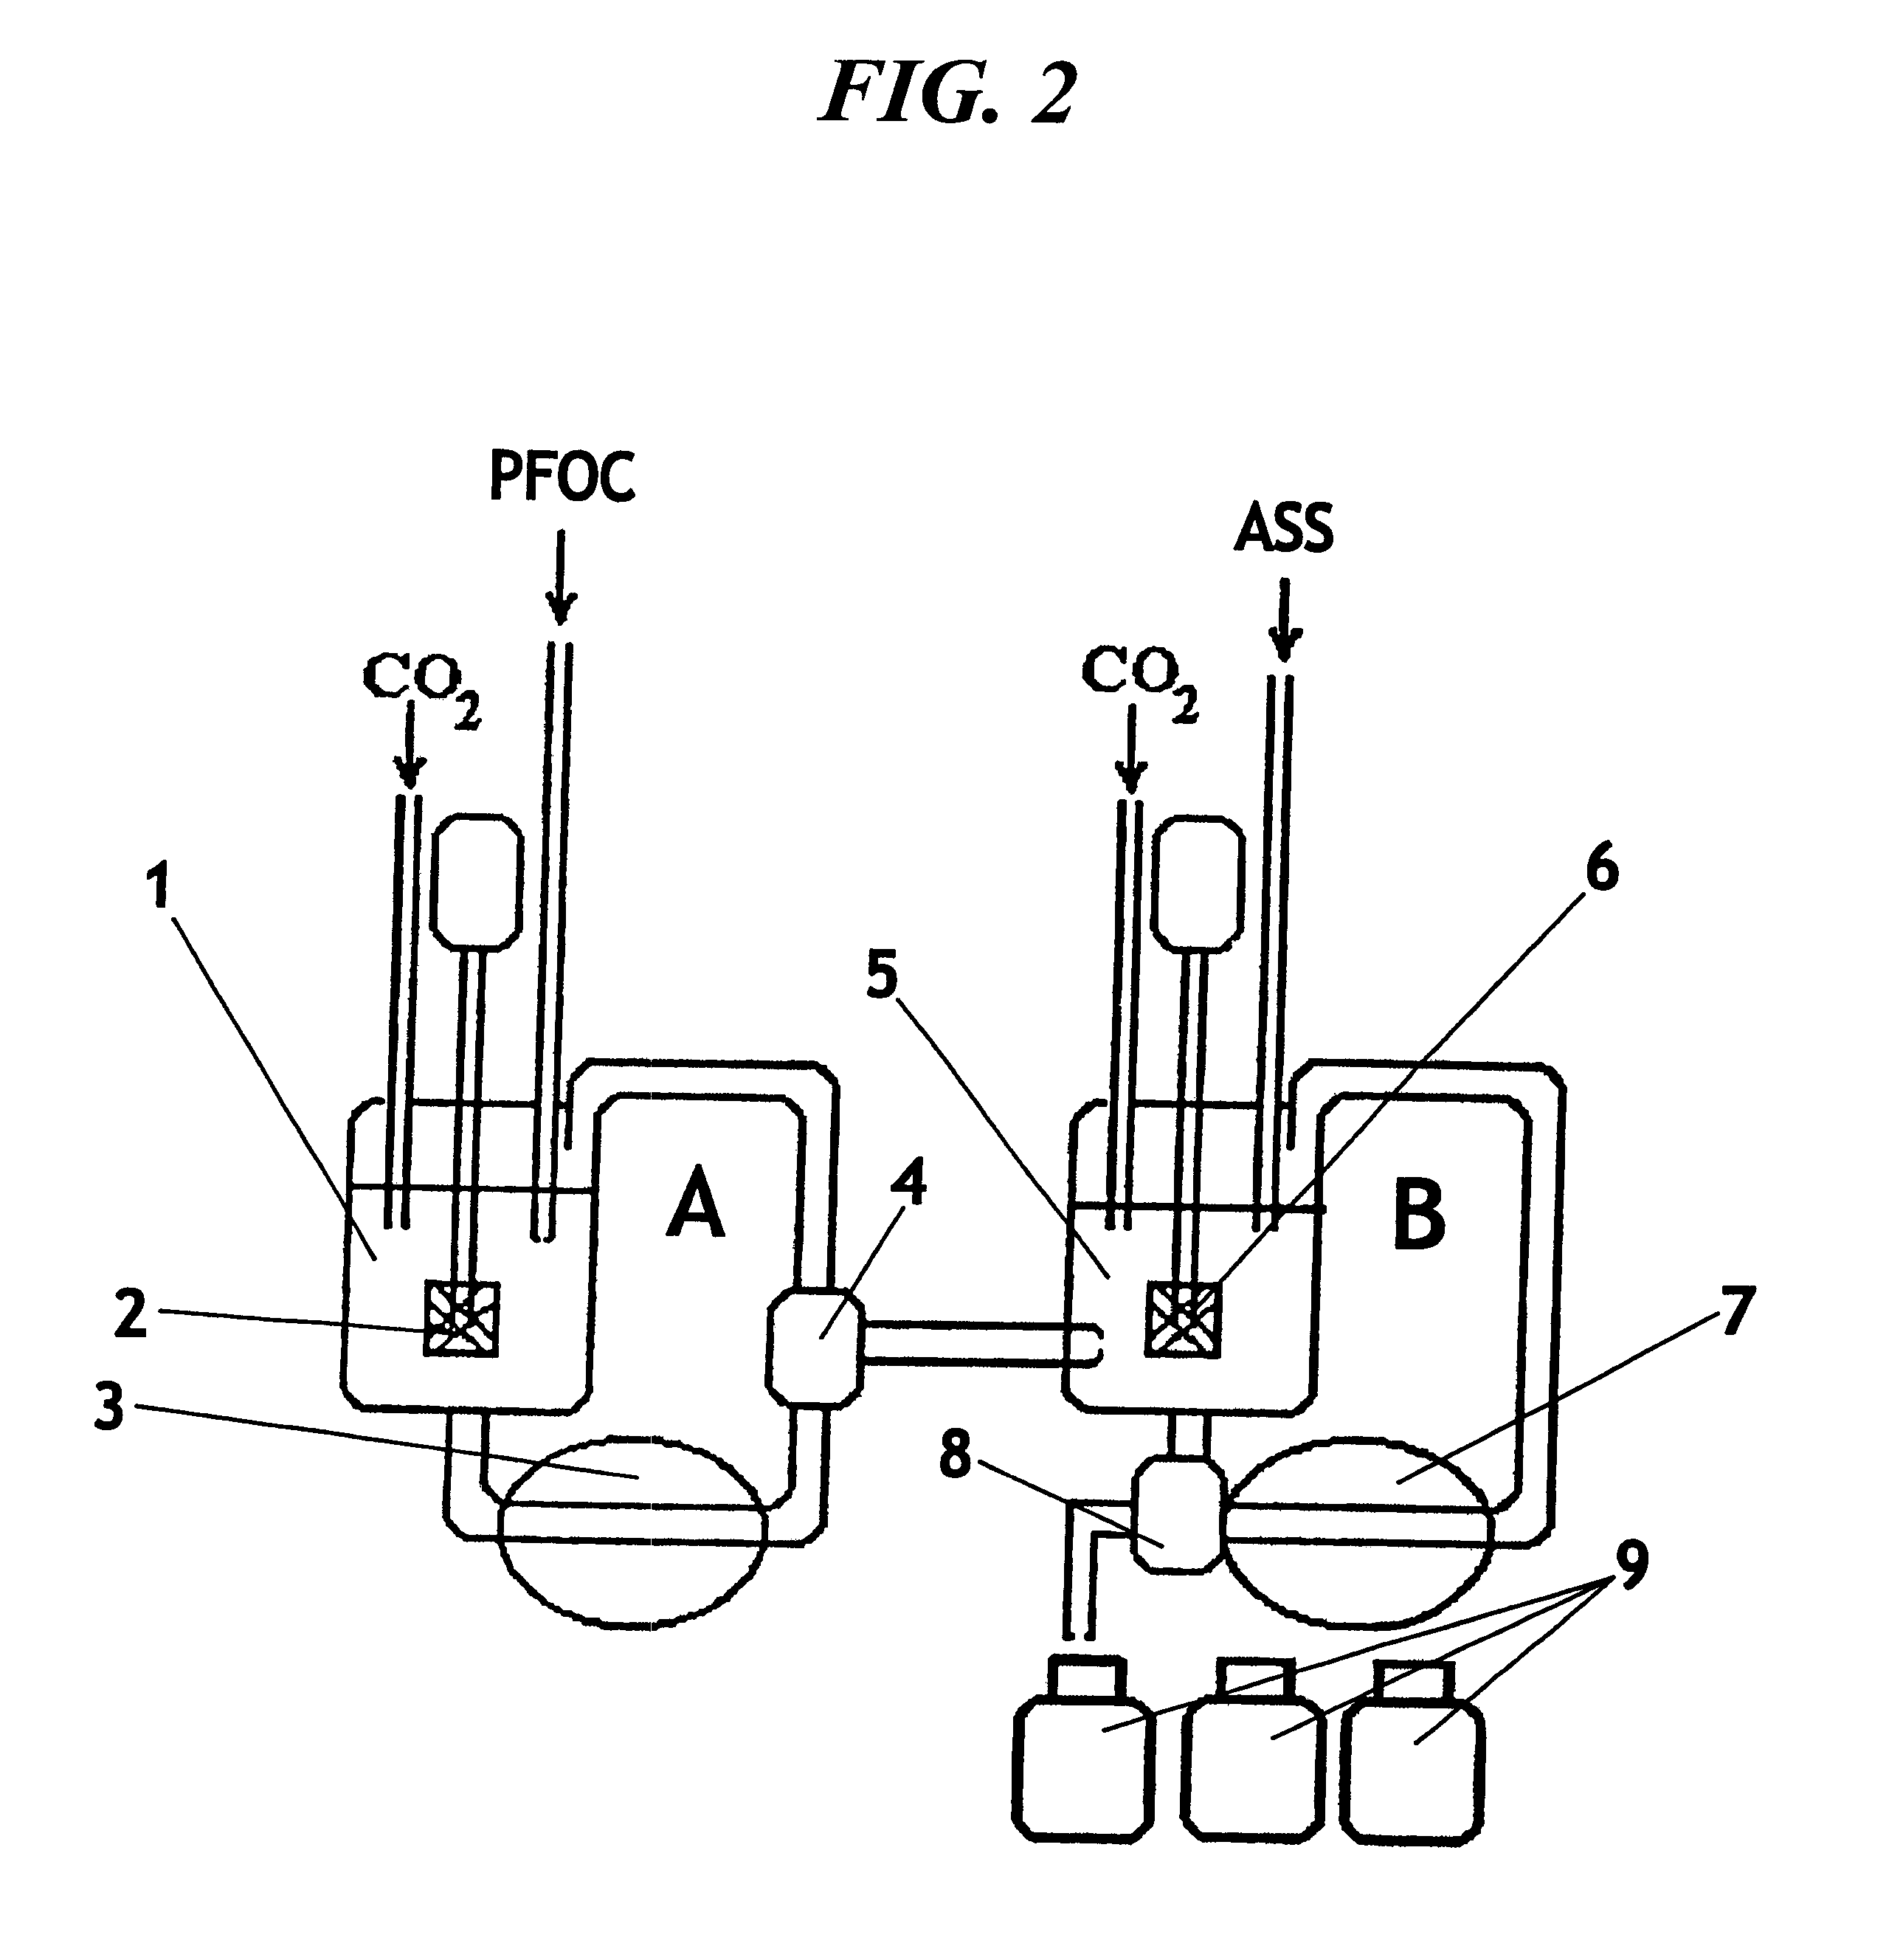 Emulsion of perfluoroorganic compounds for medical purposes, a process for the preparation thereof and methods for treating and preventing diseases with the use thereof